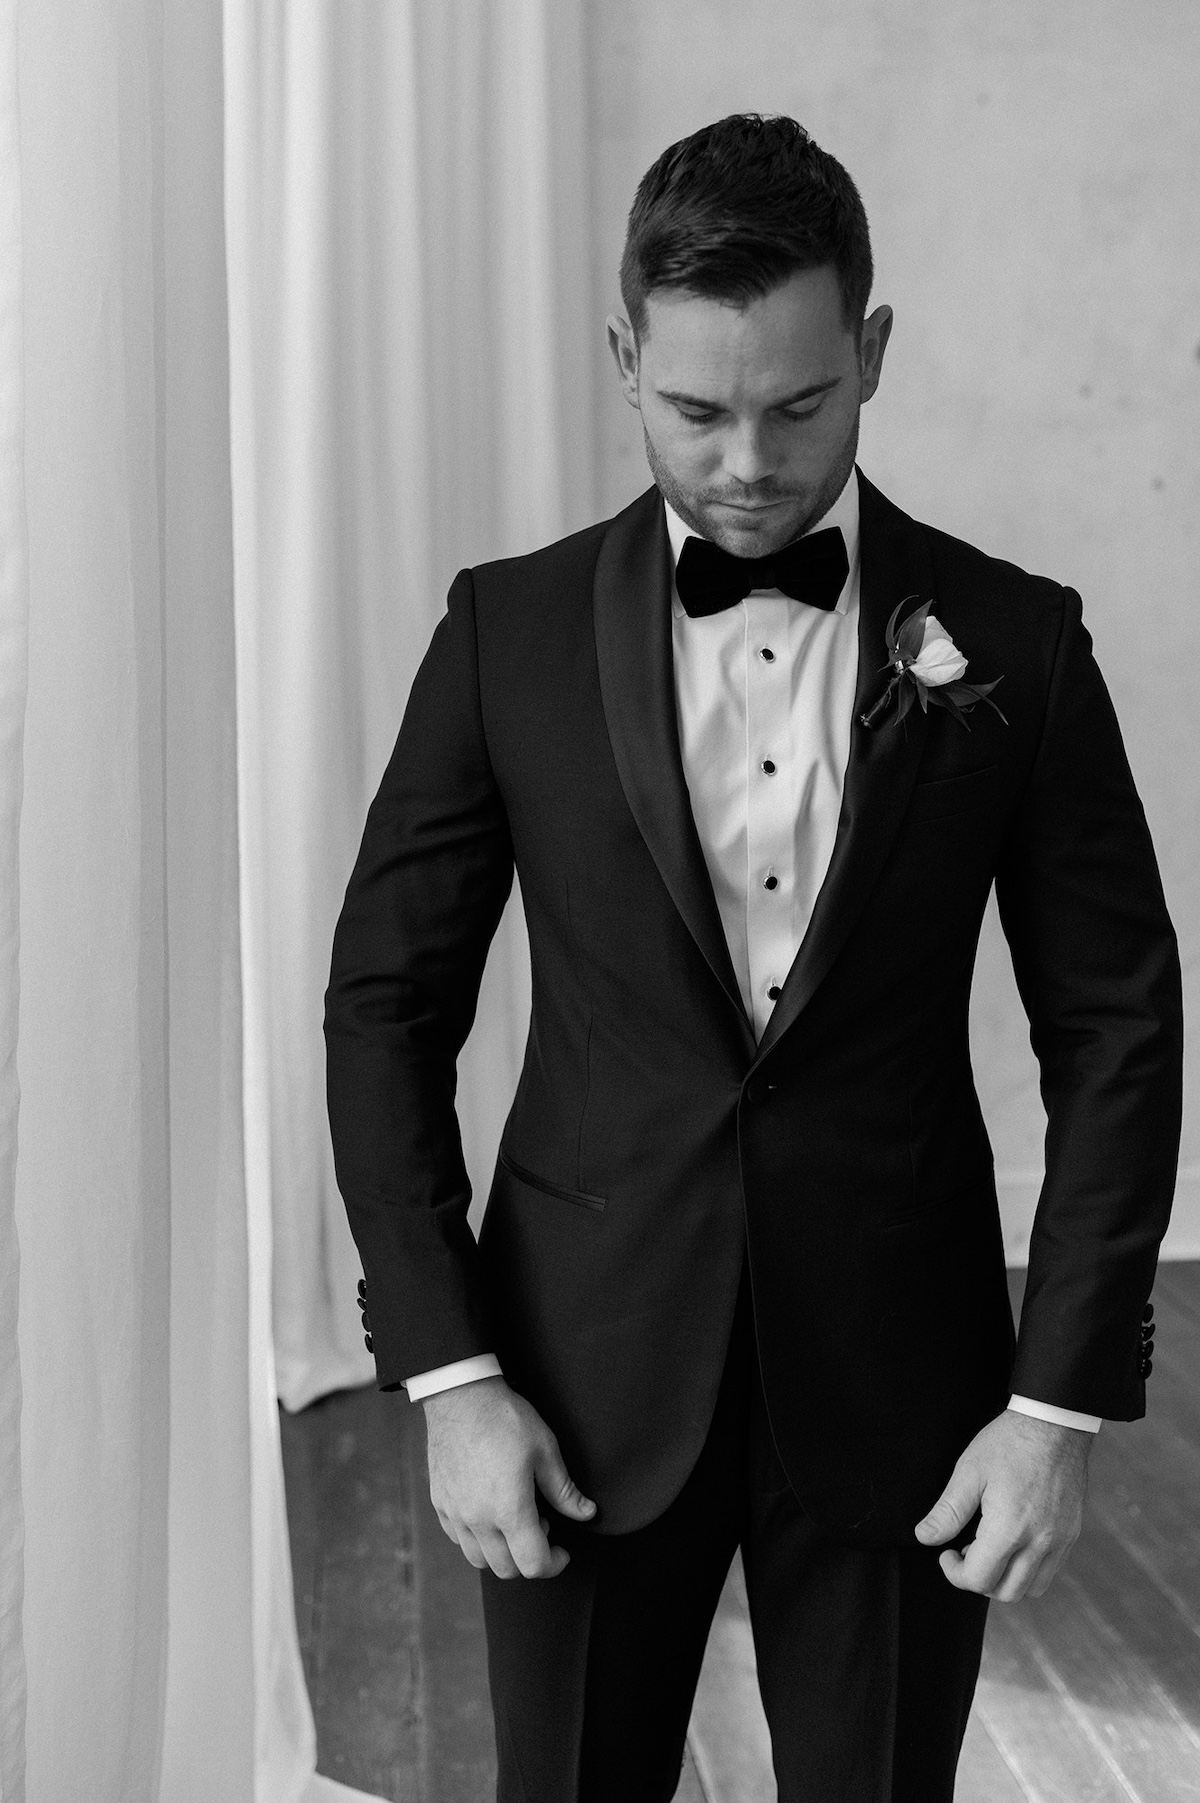 An editorial portrait capturing the groom's dapper elegance, showcasing high-end style and timeless sophistication.